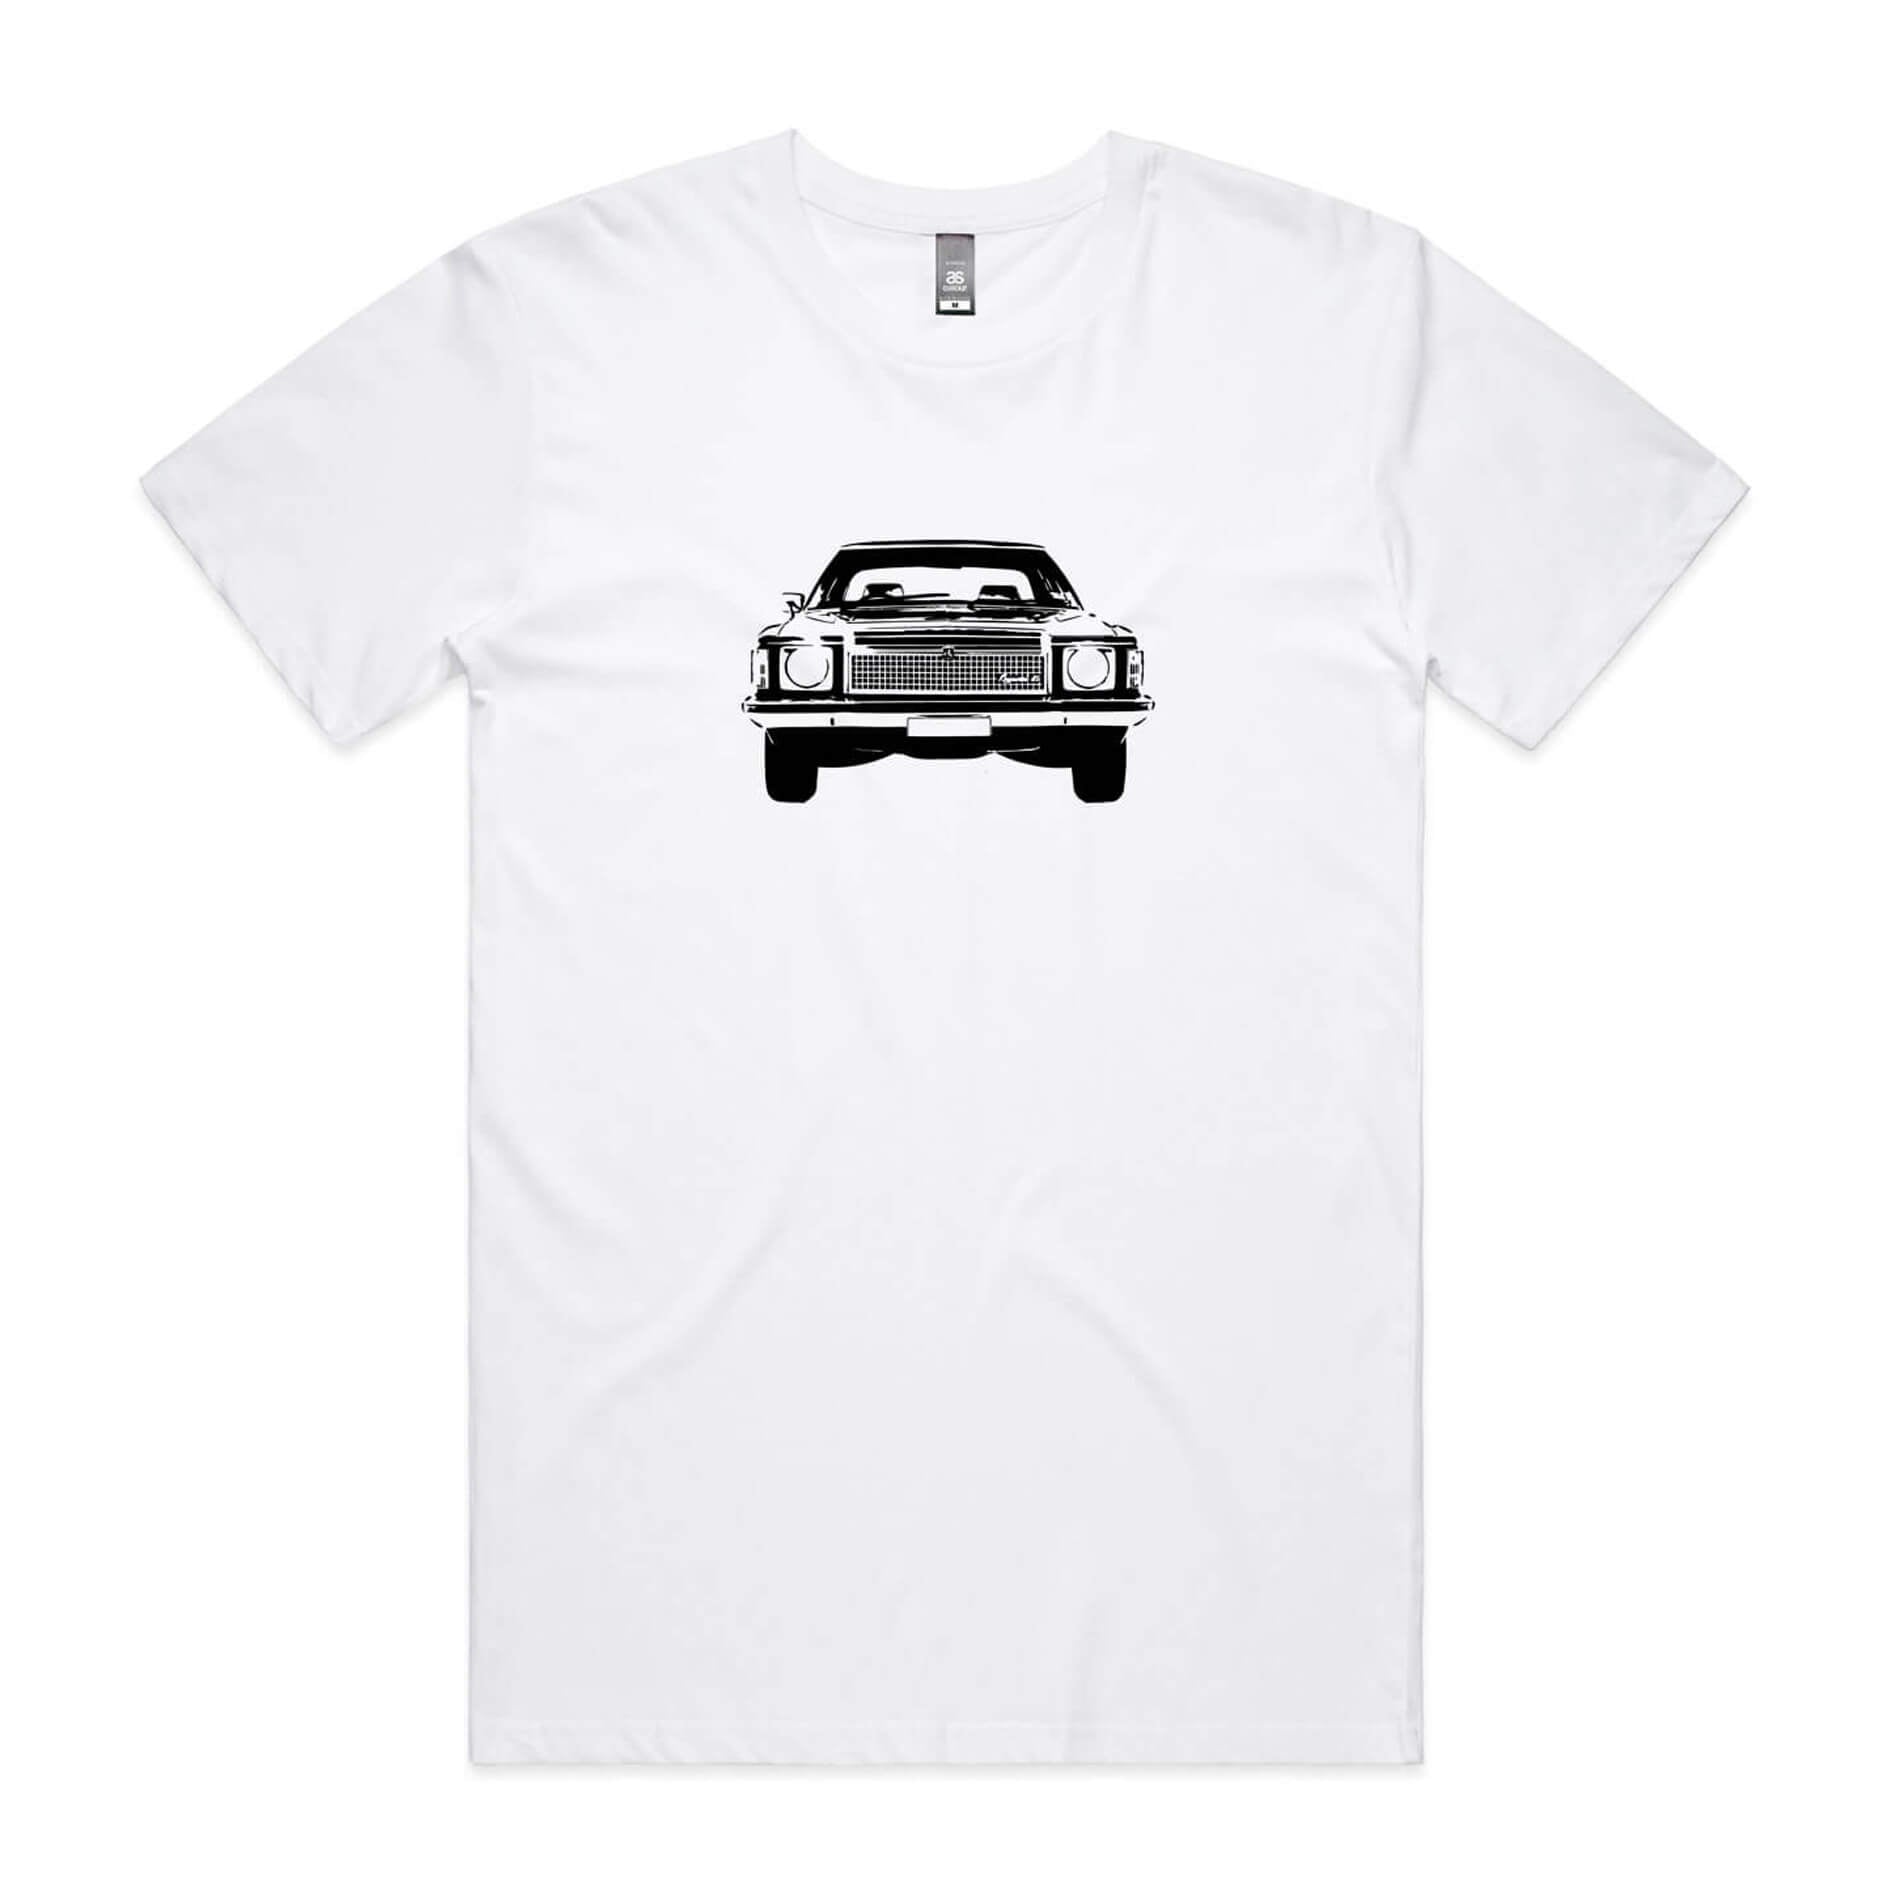 Holden HZ Kingswood t-shirt in white with black car silhouette graphic